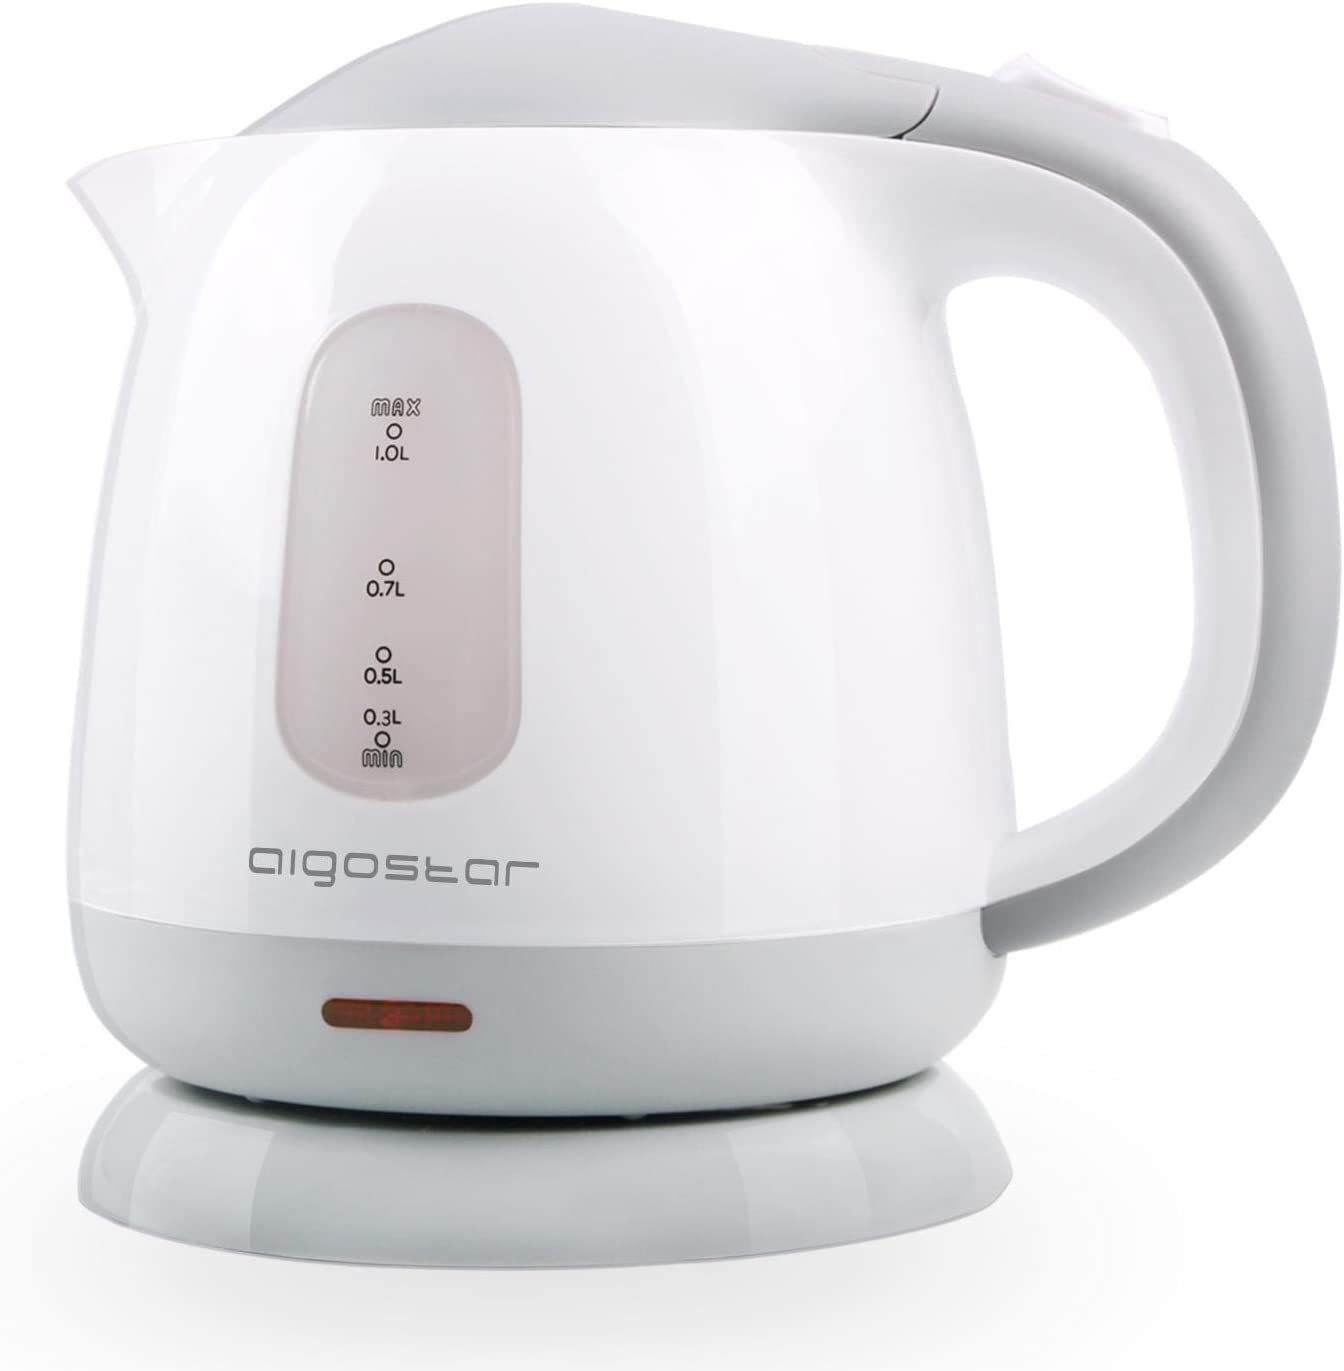 white and light grey electric tea kettle